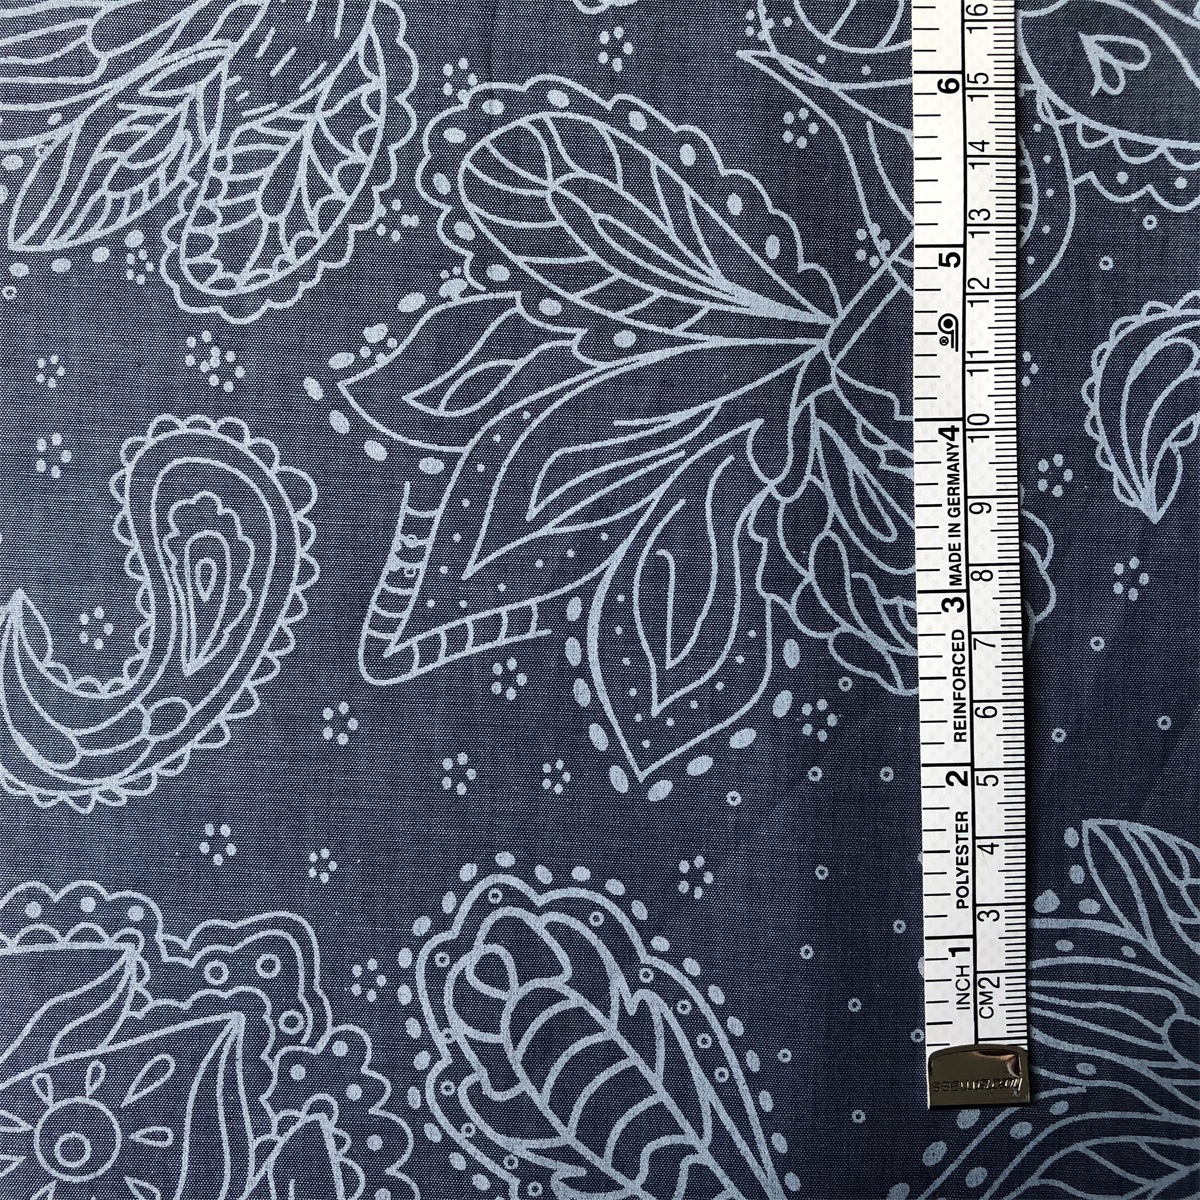 High quality Eco-friendly Cotton Fabric for men's shirts 100%cotton printed on yarn dyed chambray plain woven shirts fabric